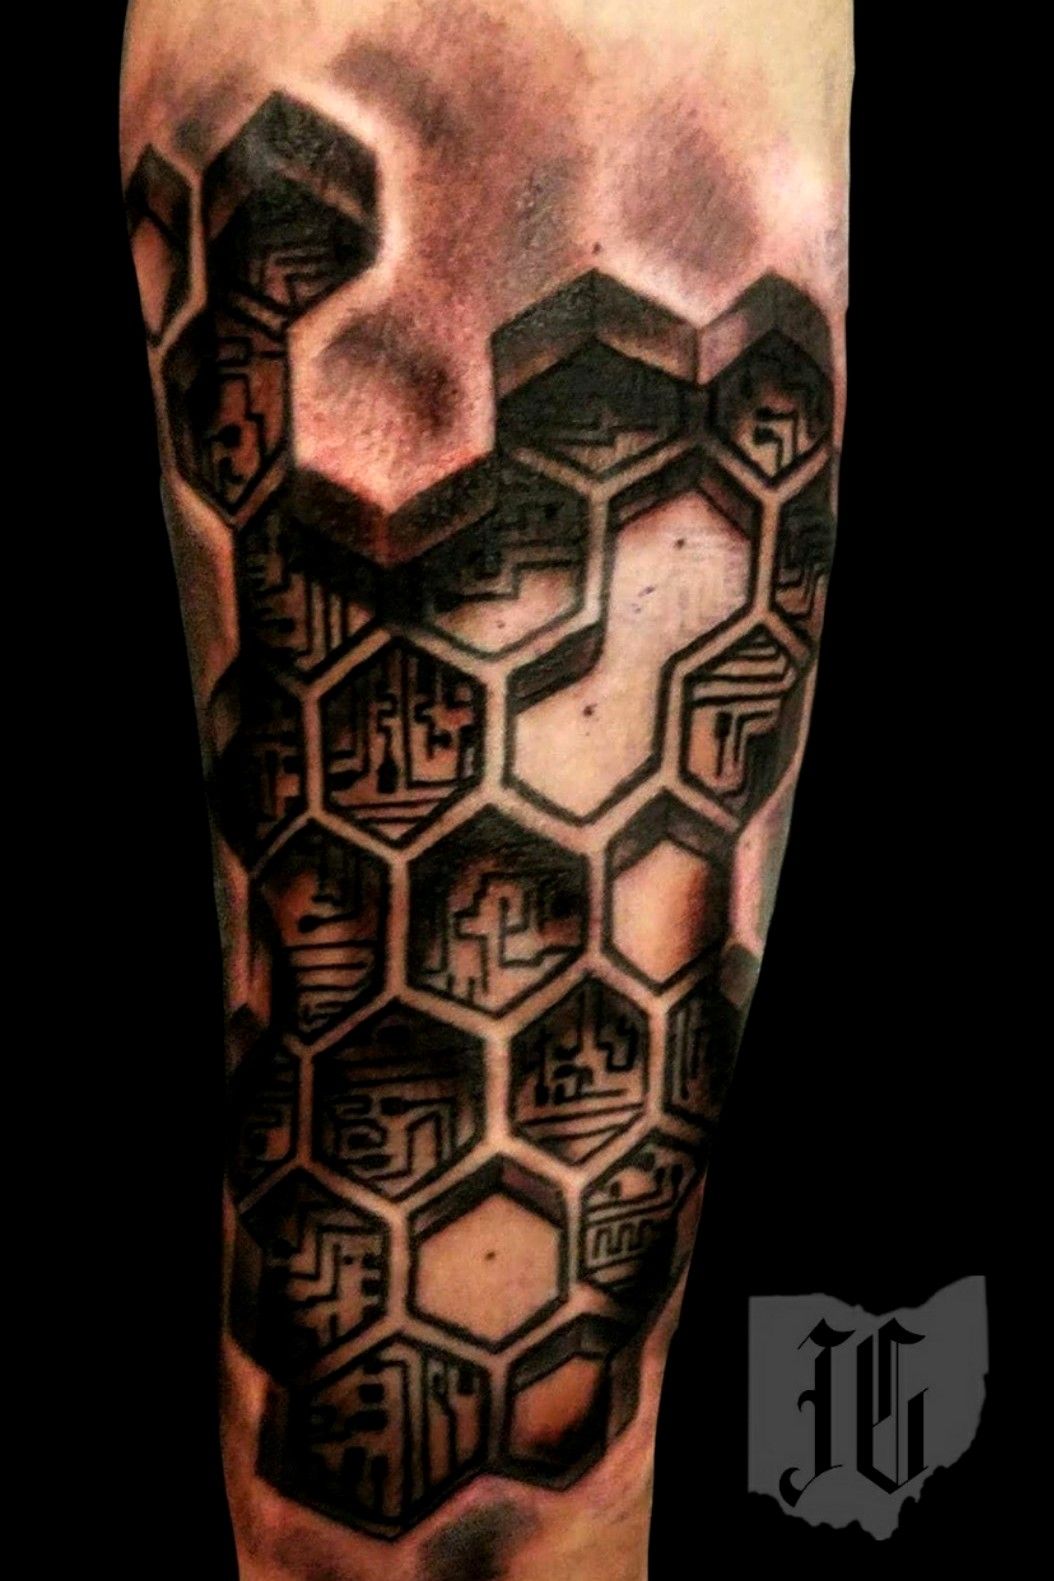 Tattoo uploaded by Jordyn Grine Tattoo  First part of a 3d cyborg  geometric sleeve Man i love those crazy tattoos that have depth and  dimension that look so damn real it